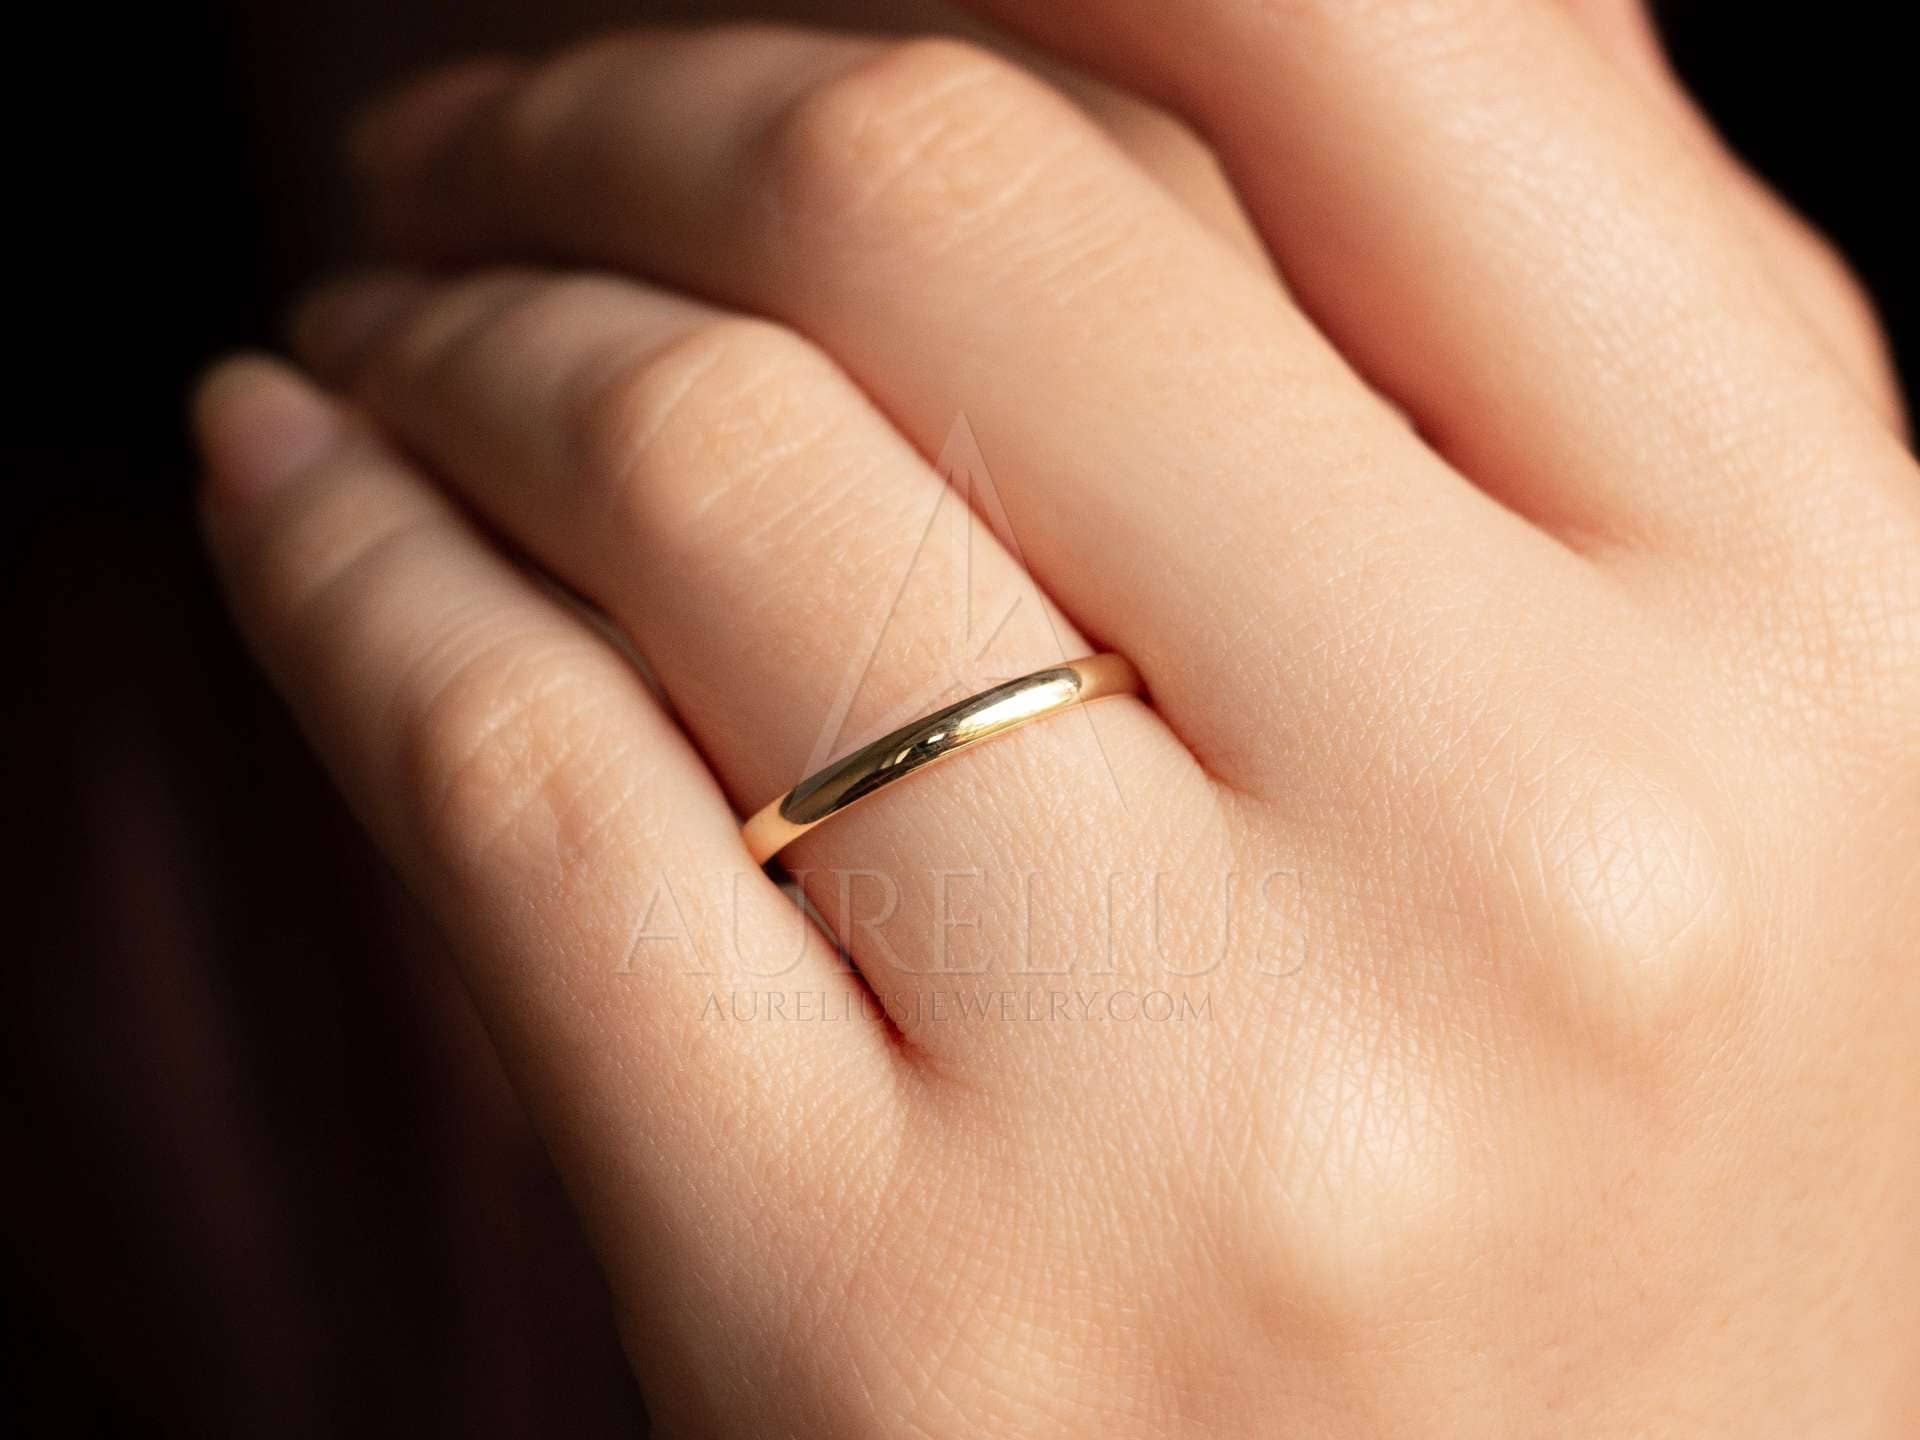 14 K SOLID Gold TRADITIONAL BAND OR STACKING RING HANDMADE IN U.S. 2.50 MM 